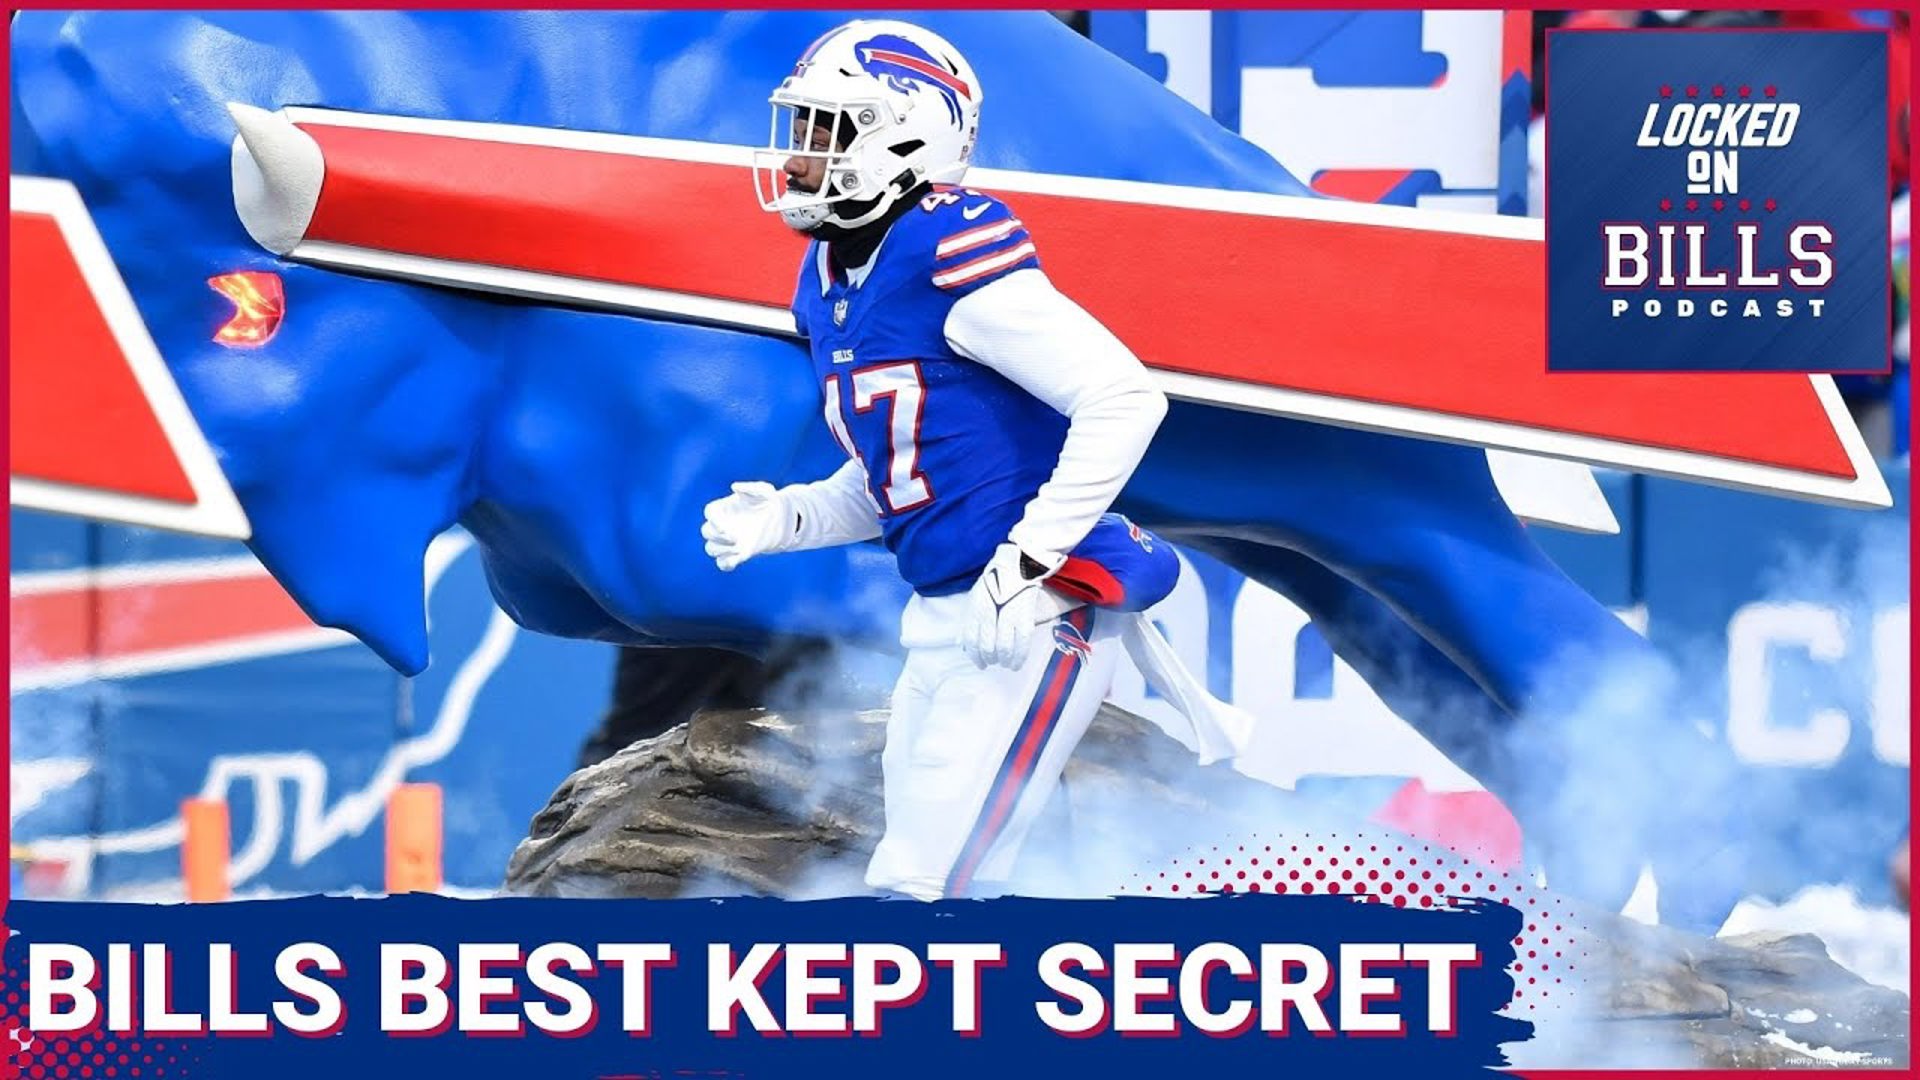 Christian Benford is the Buffalo Bills best kept secret and it’s time for that to change